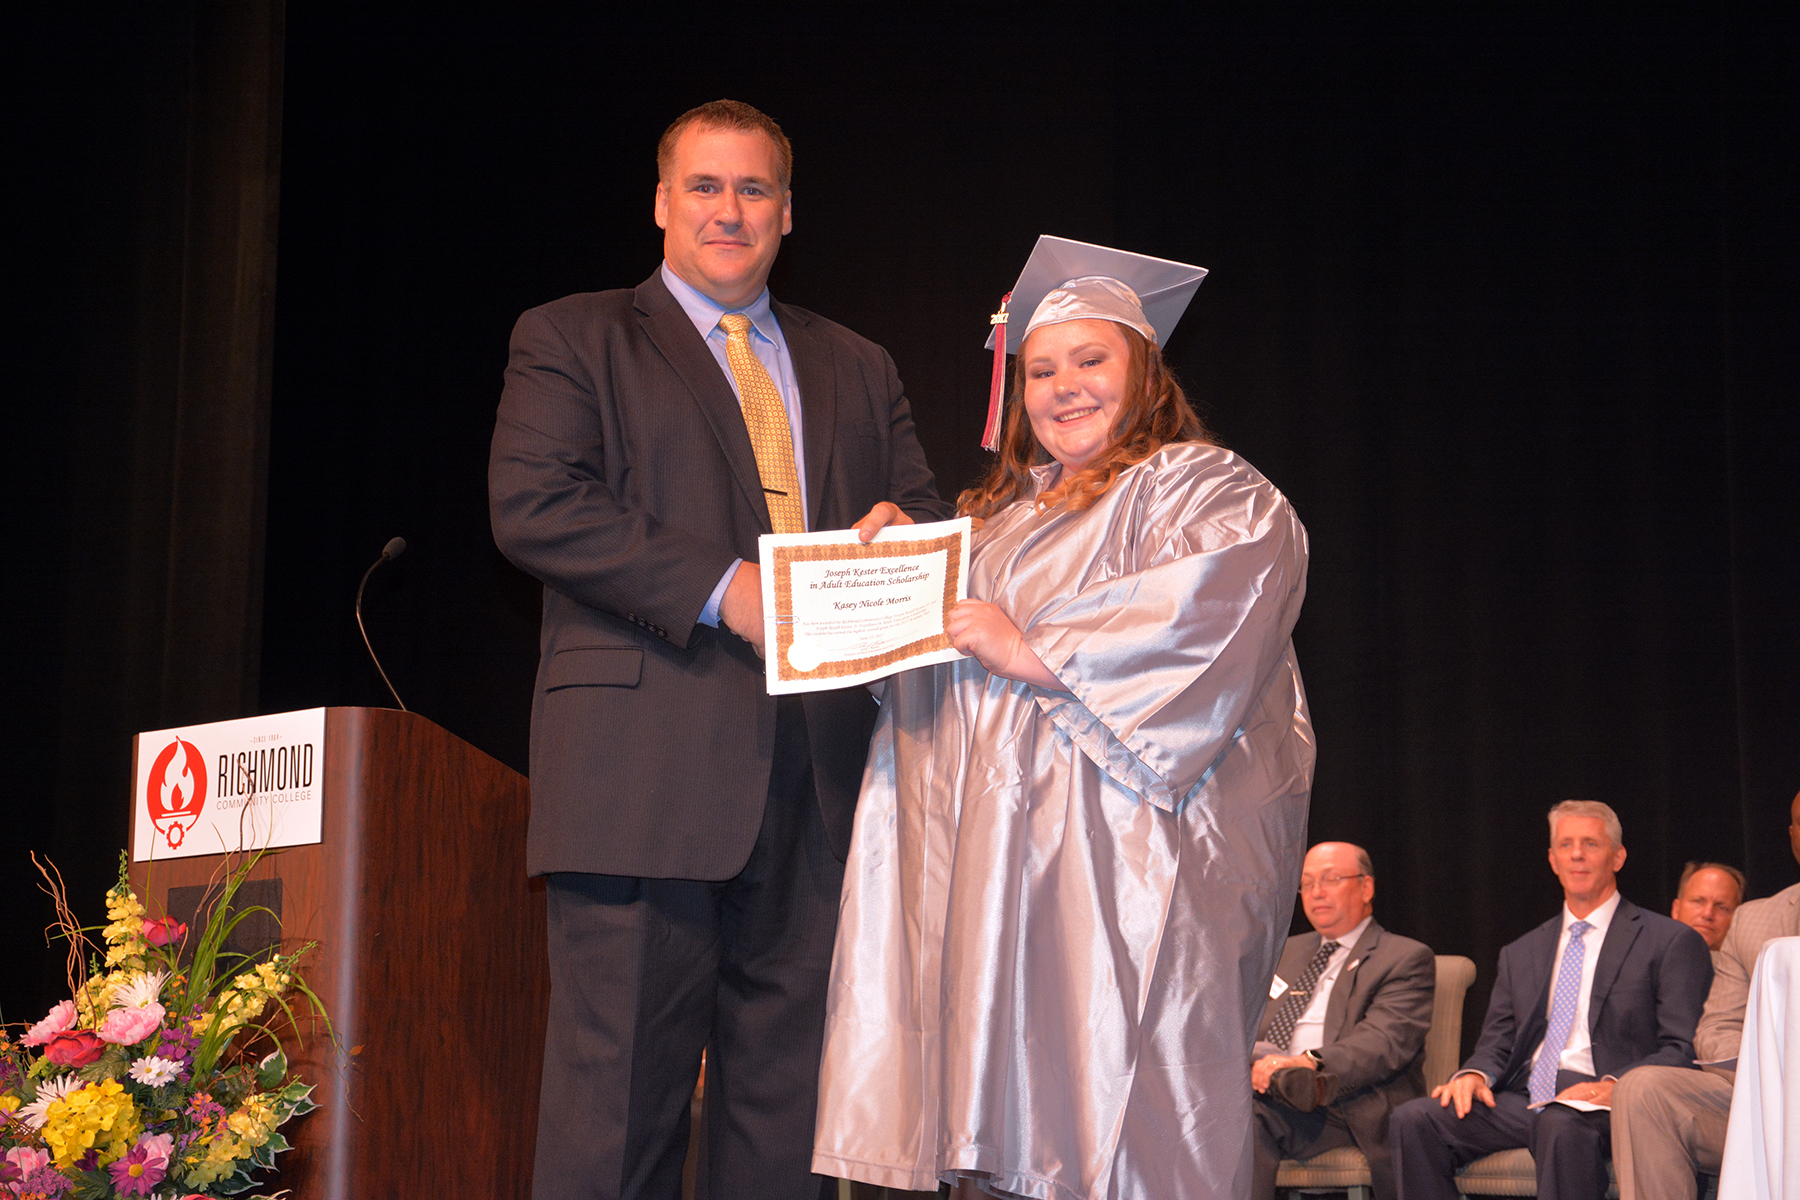 Pictured is Adult High School graduate Kasey Morris receiving the Joseph R. Kester Excellence in Education Scholarship from Richmond Community College Director of Adult Education John Kester.